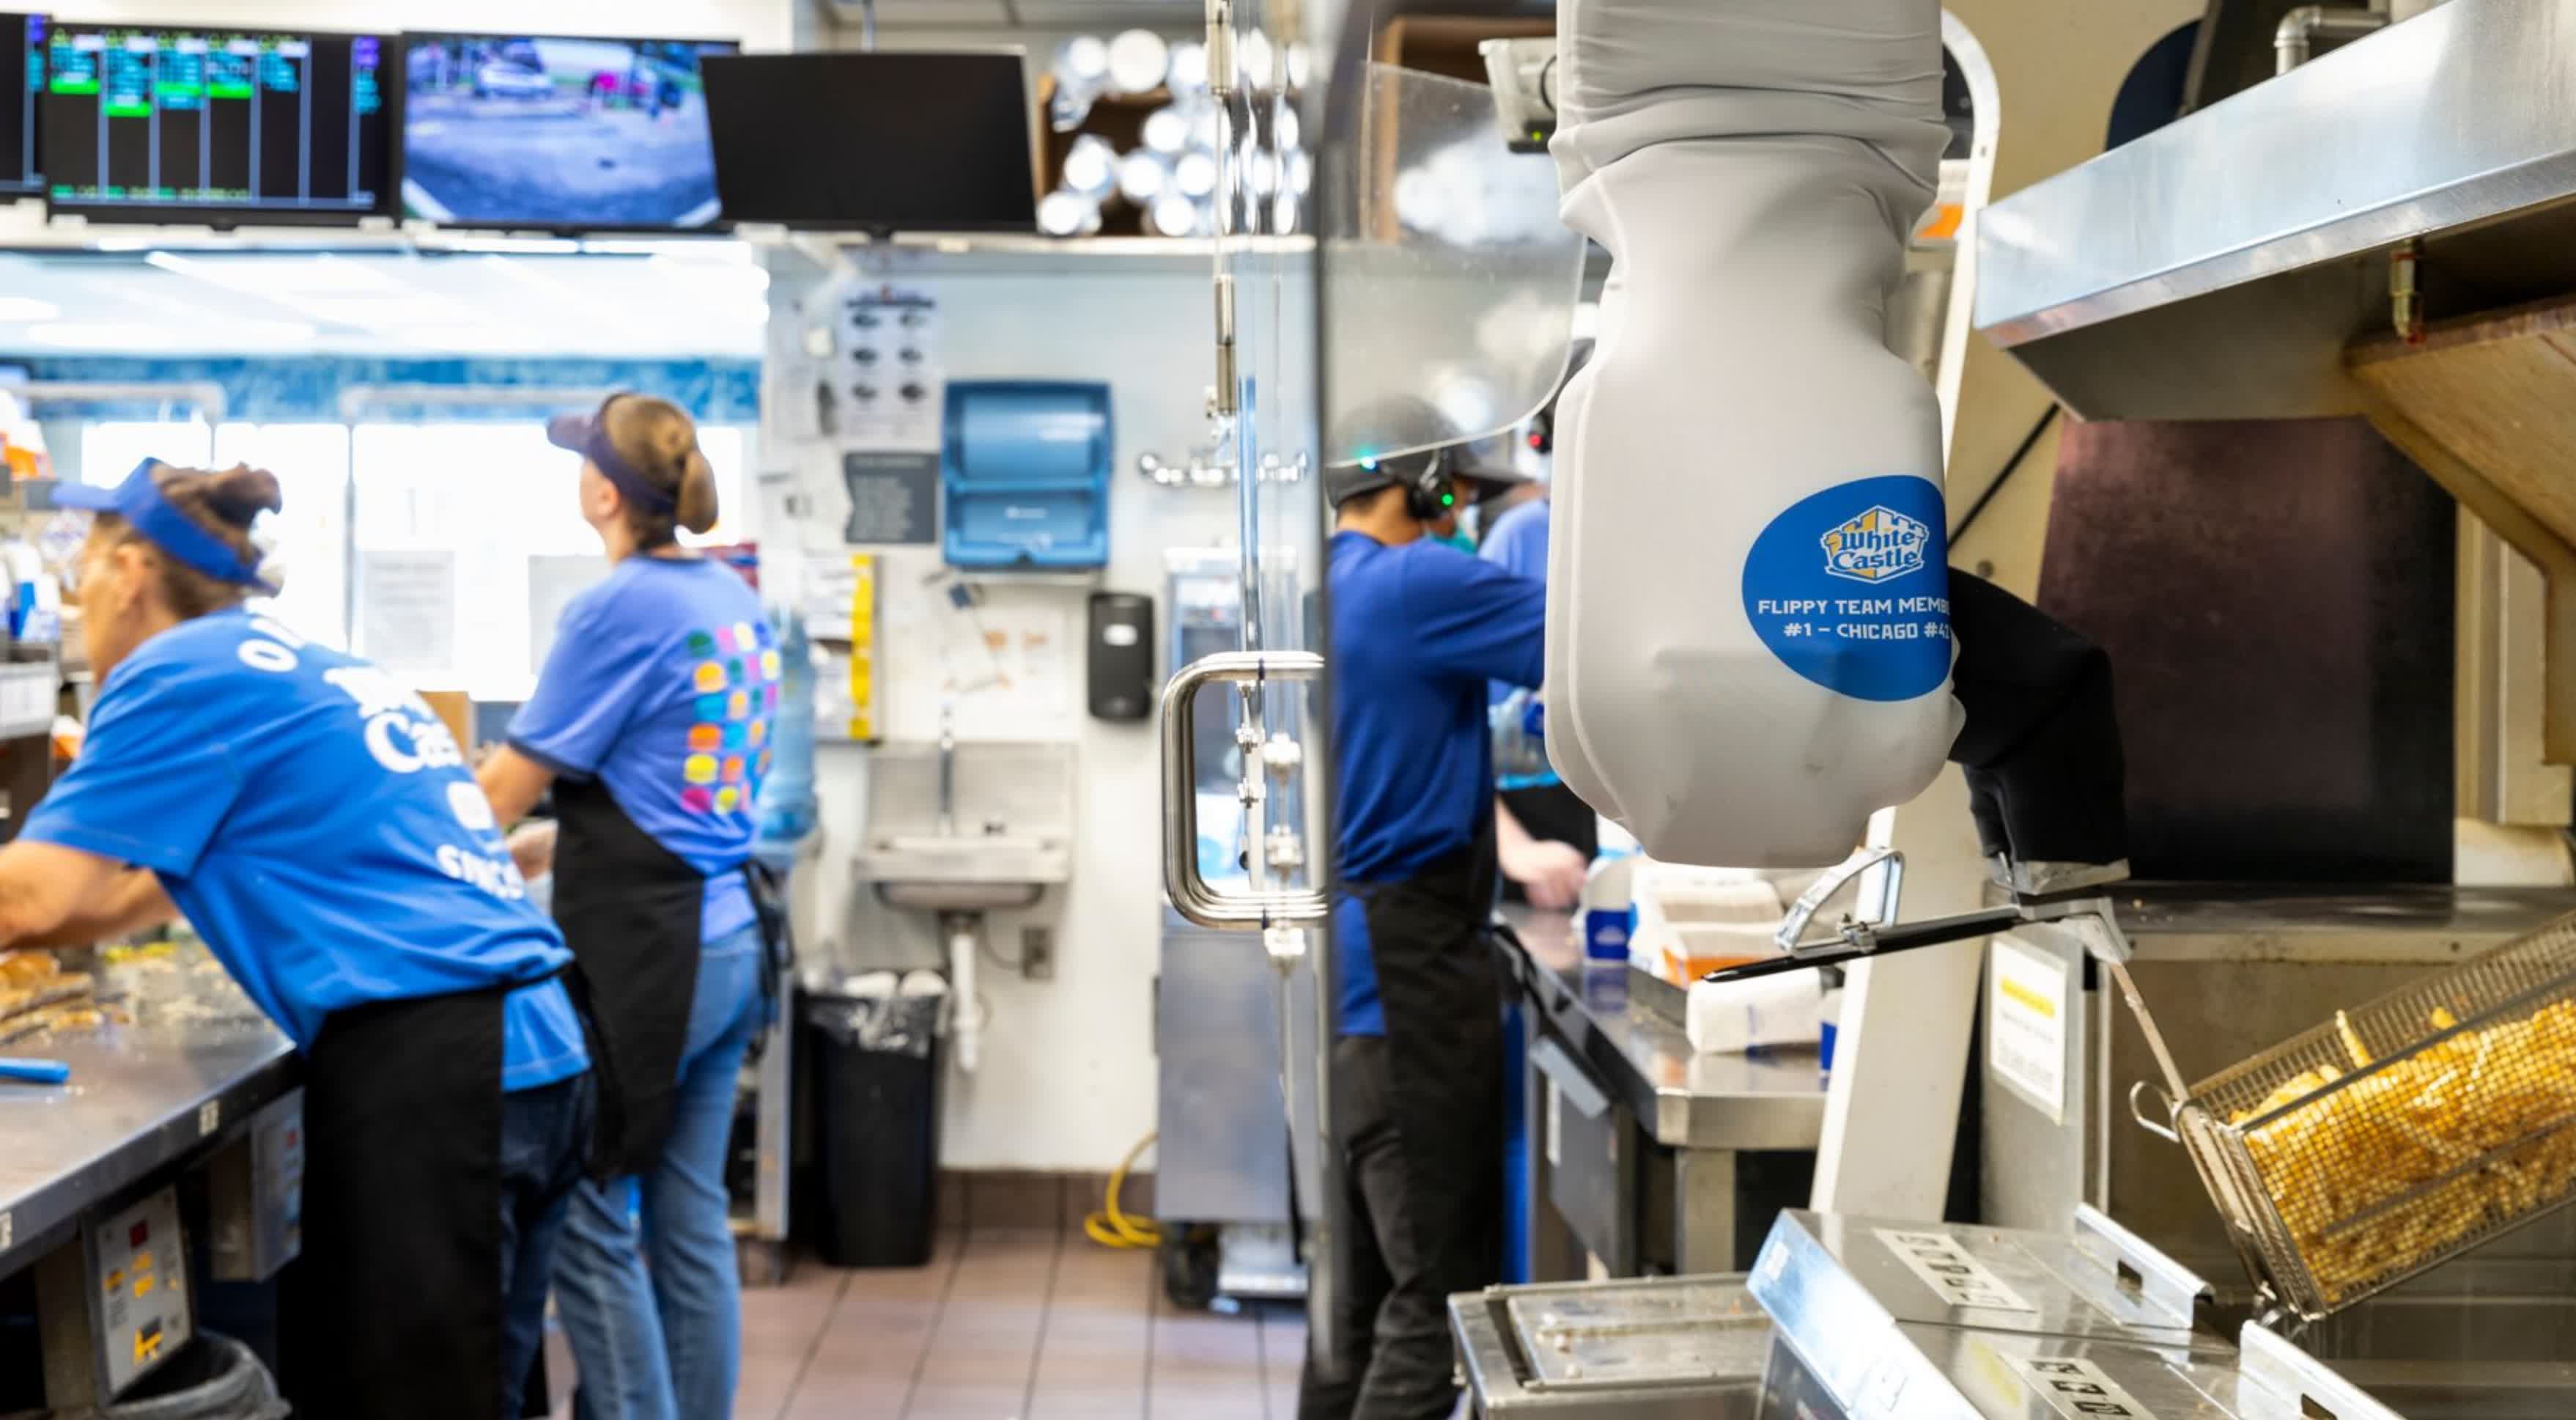 Restaurant operators are turning to robots as labor shortage drags on